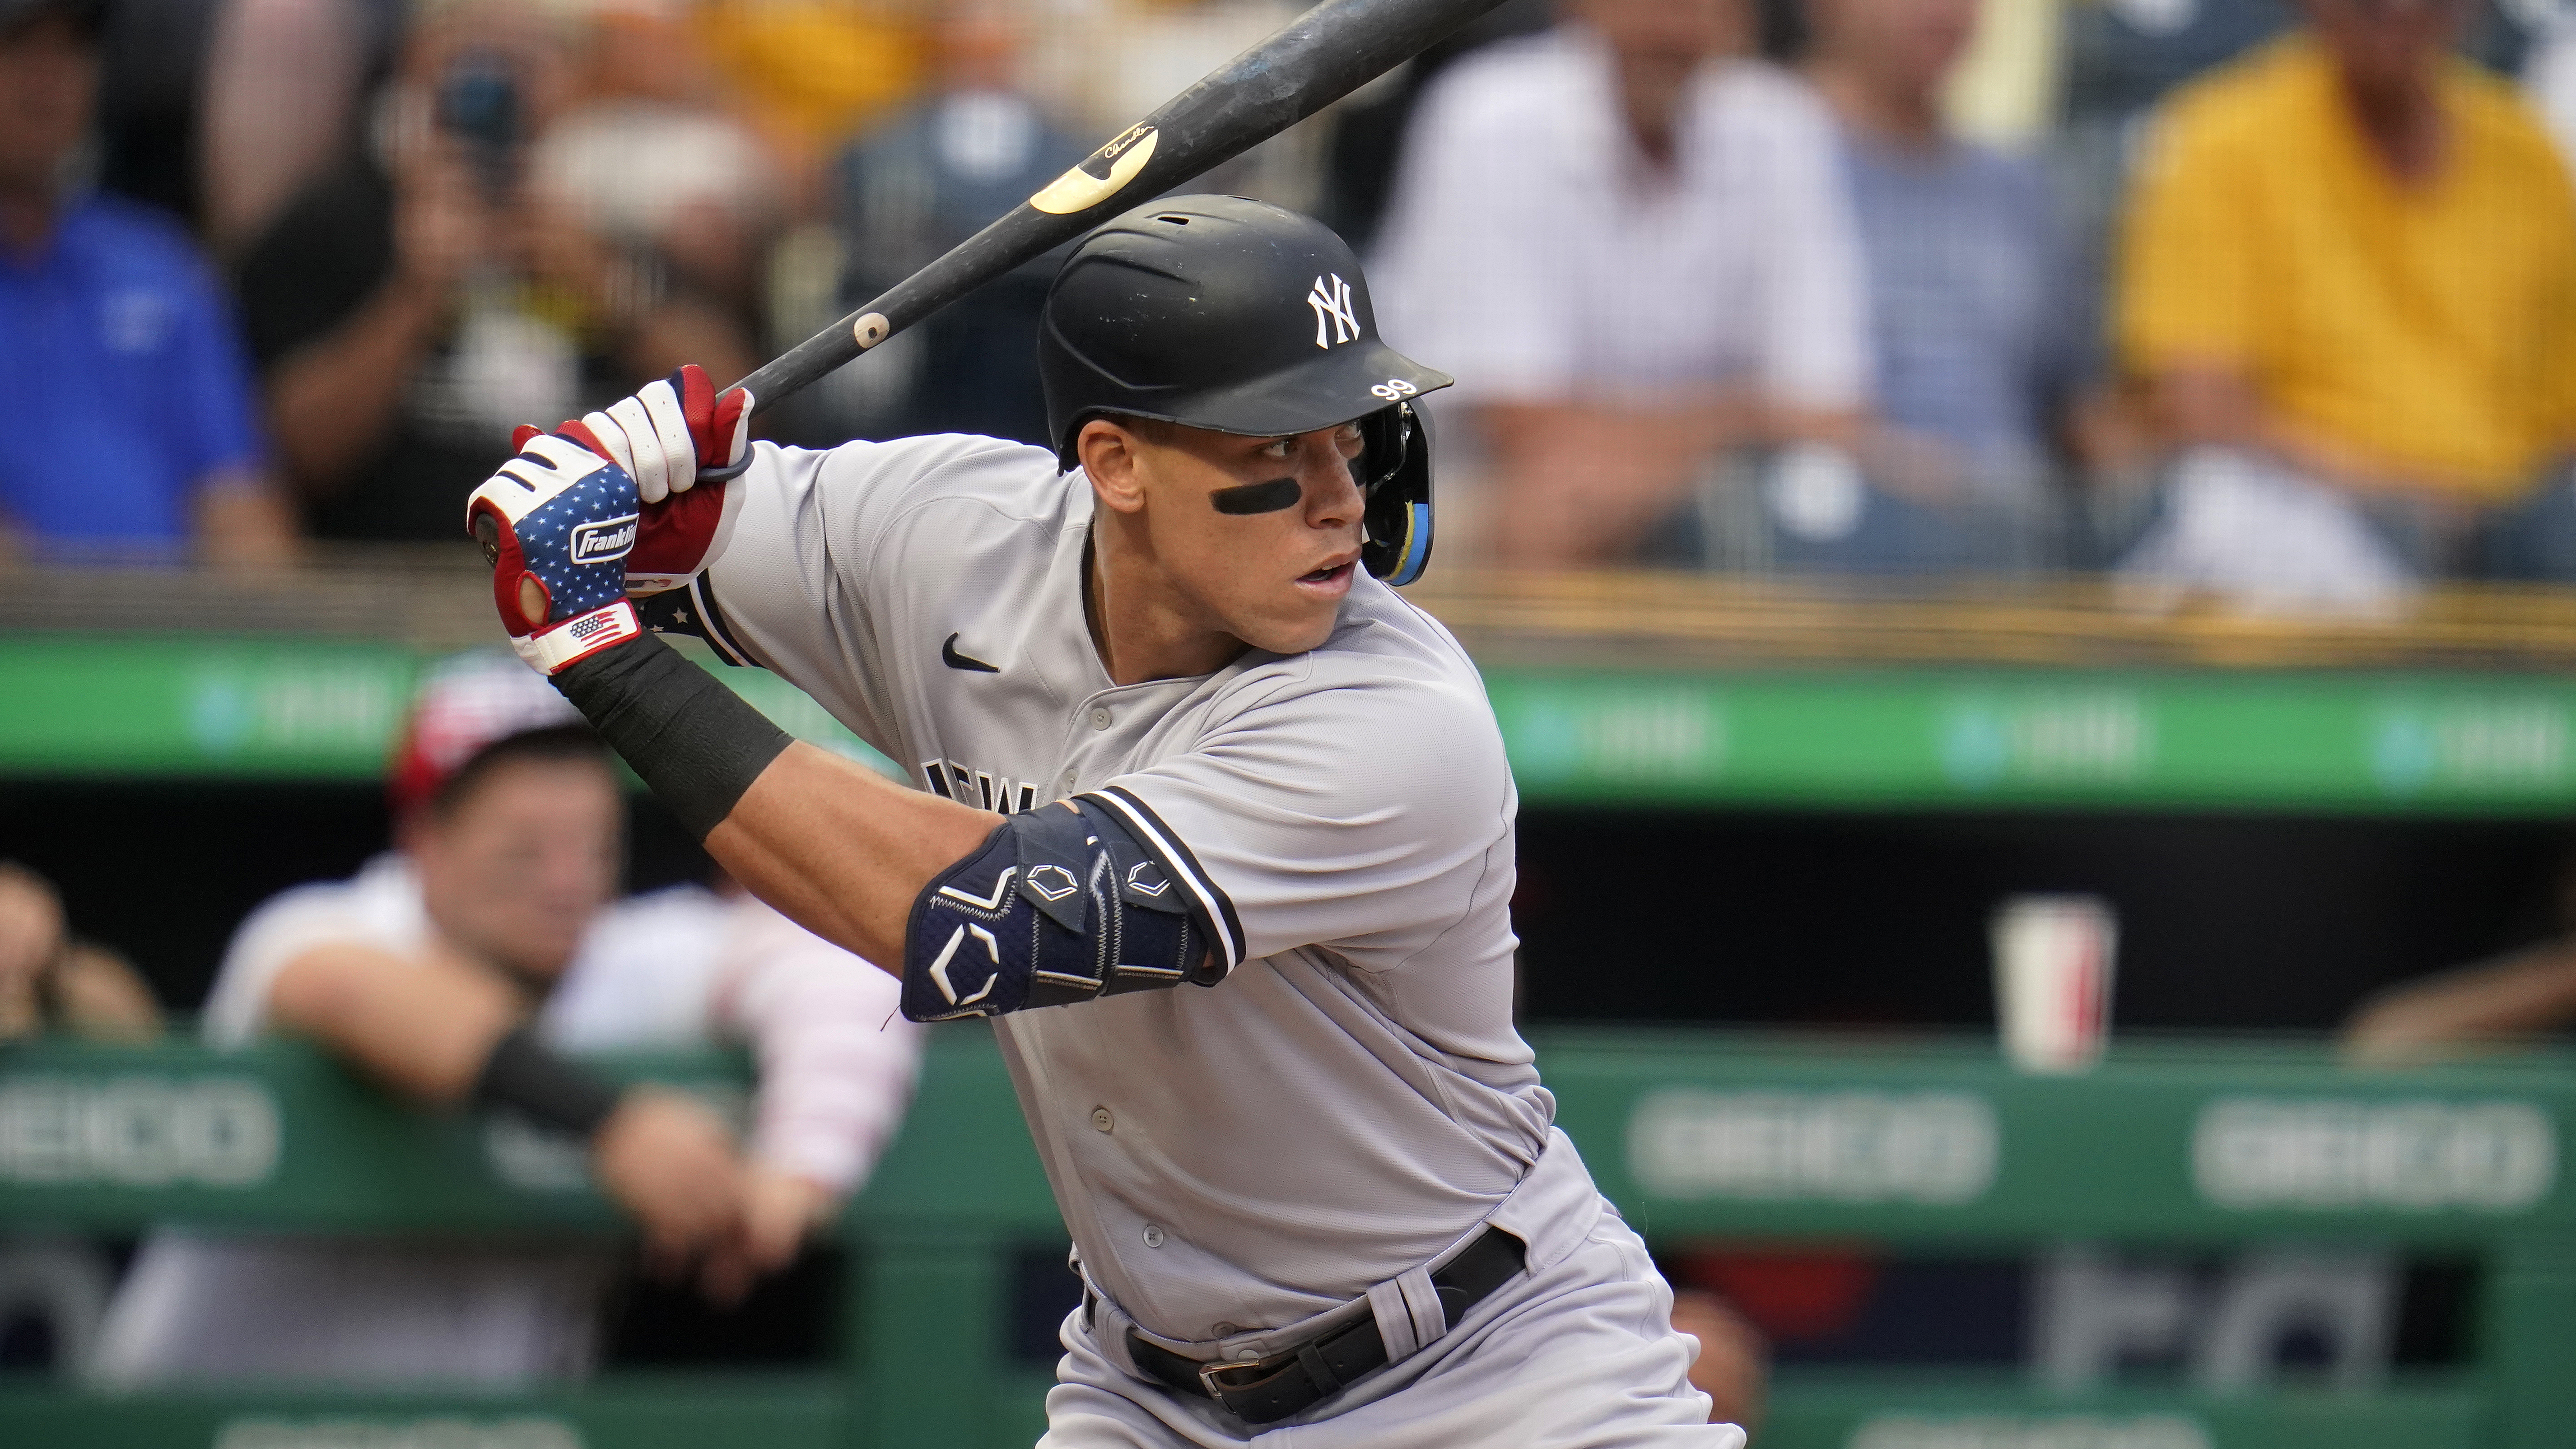 July 9th MLB schedule FREE live streams, times, TV channels, schedule for Yankees vs